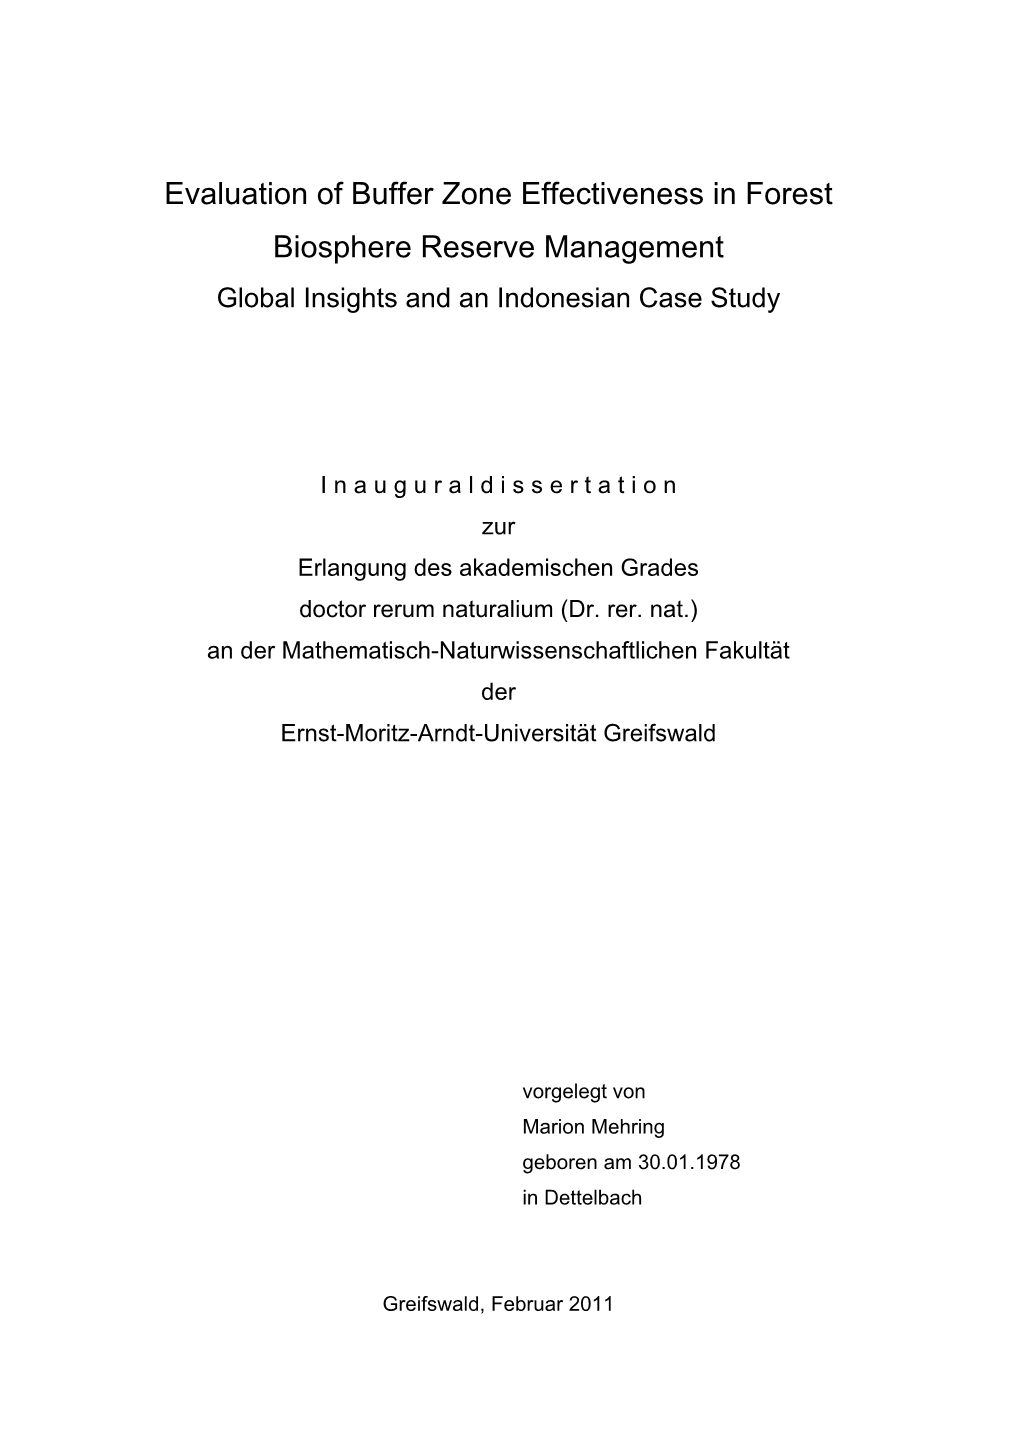 Evaluation of Buffer Zone Effectiveness in Forest Biosphere Reserve Management Global Insights and an Indonesian Case Study